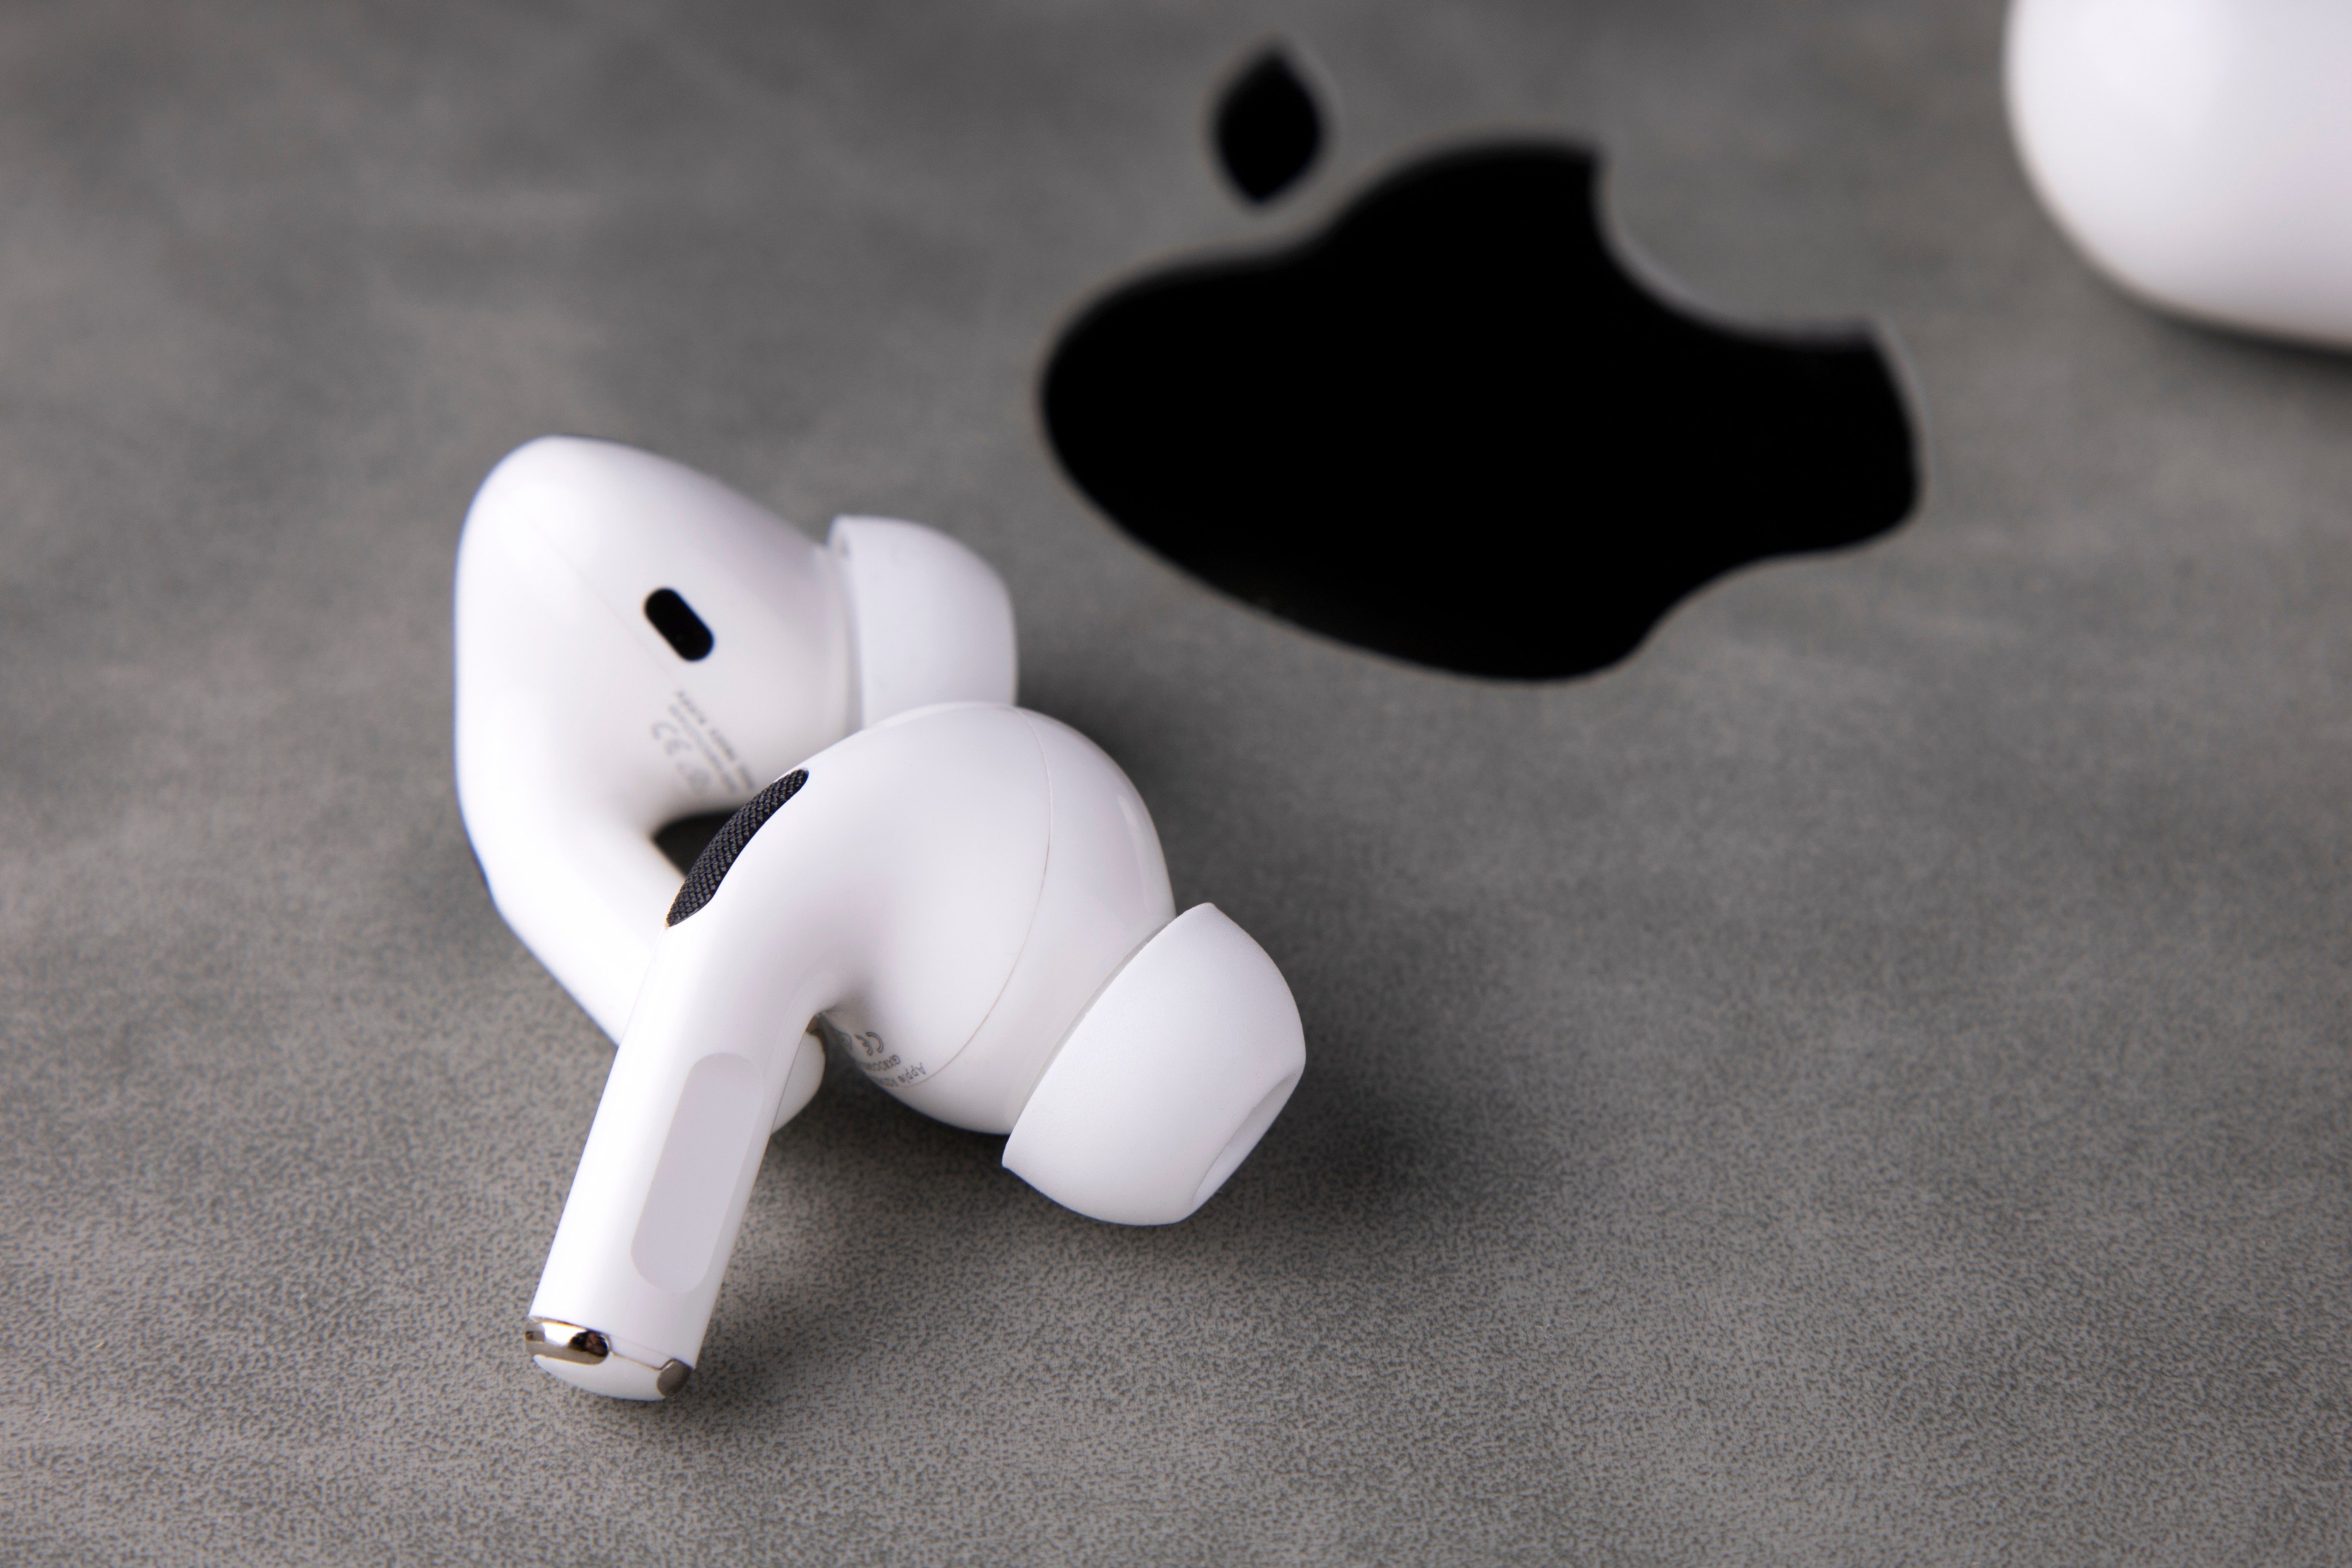 Apple’s AirPods Pro 2 have superior active noise cancellation but Apple doesn’t offer an app for their use with Android handsets. On the other hand, one big manufacturer of Android phones and earbuds does have an app for using the latter with iPhones. Photo: Shutterstock